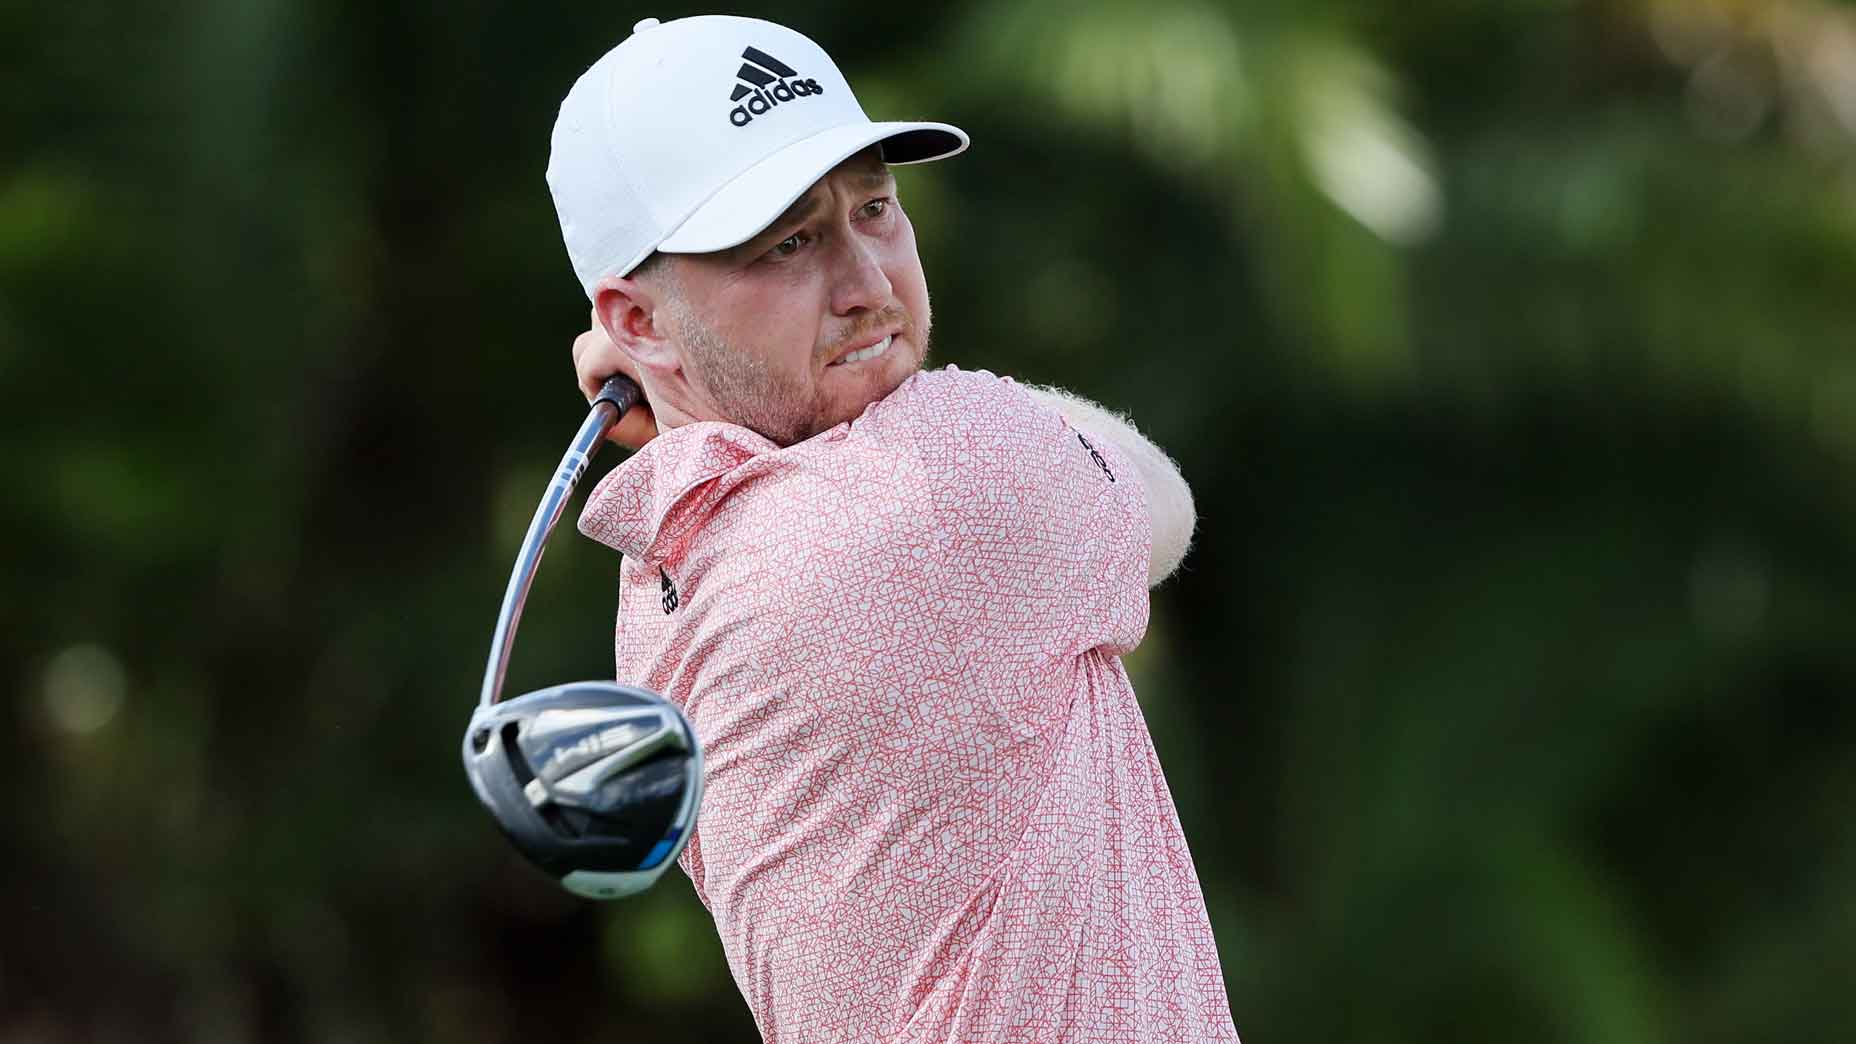 2022 Honda Classic live coverage How to watch Round 2 on Friday